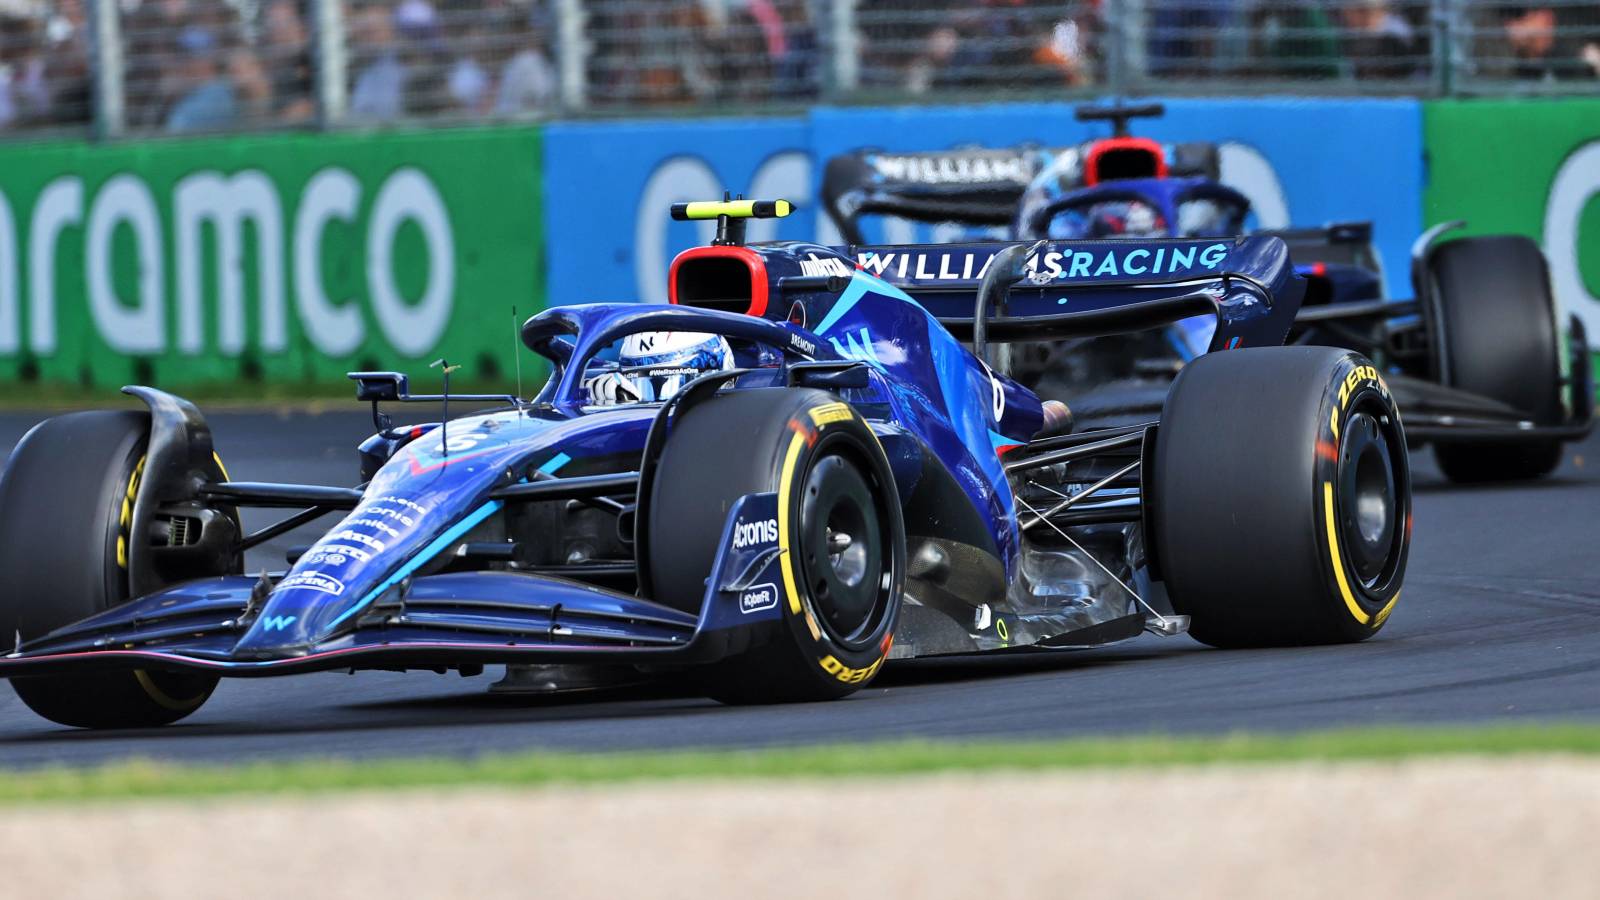 Williams engineers wanted the car stripped entirely of all paint